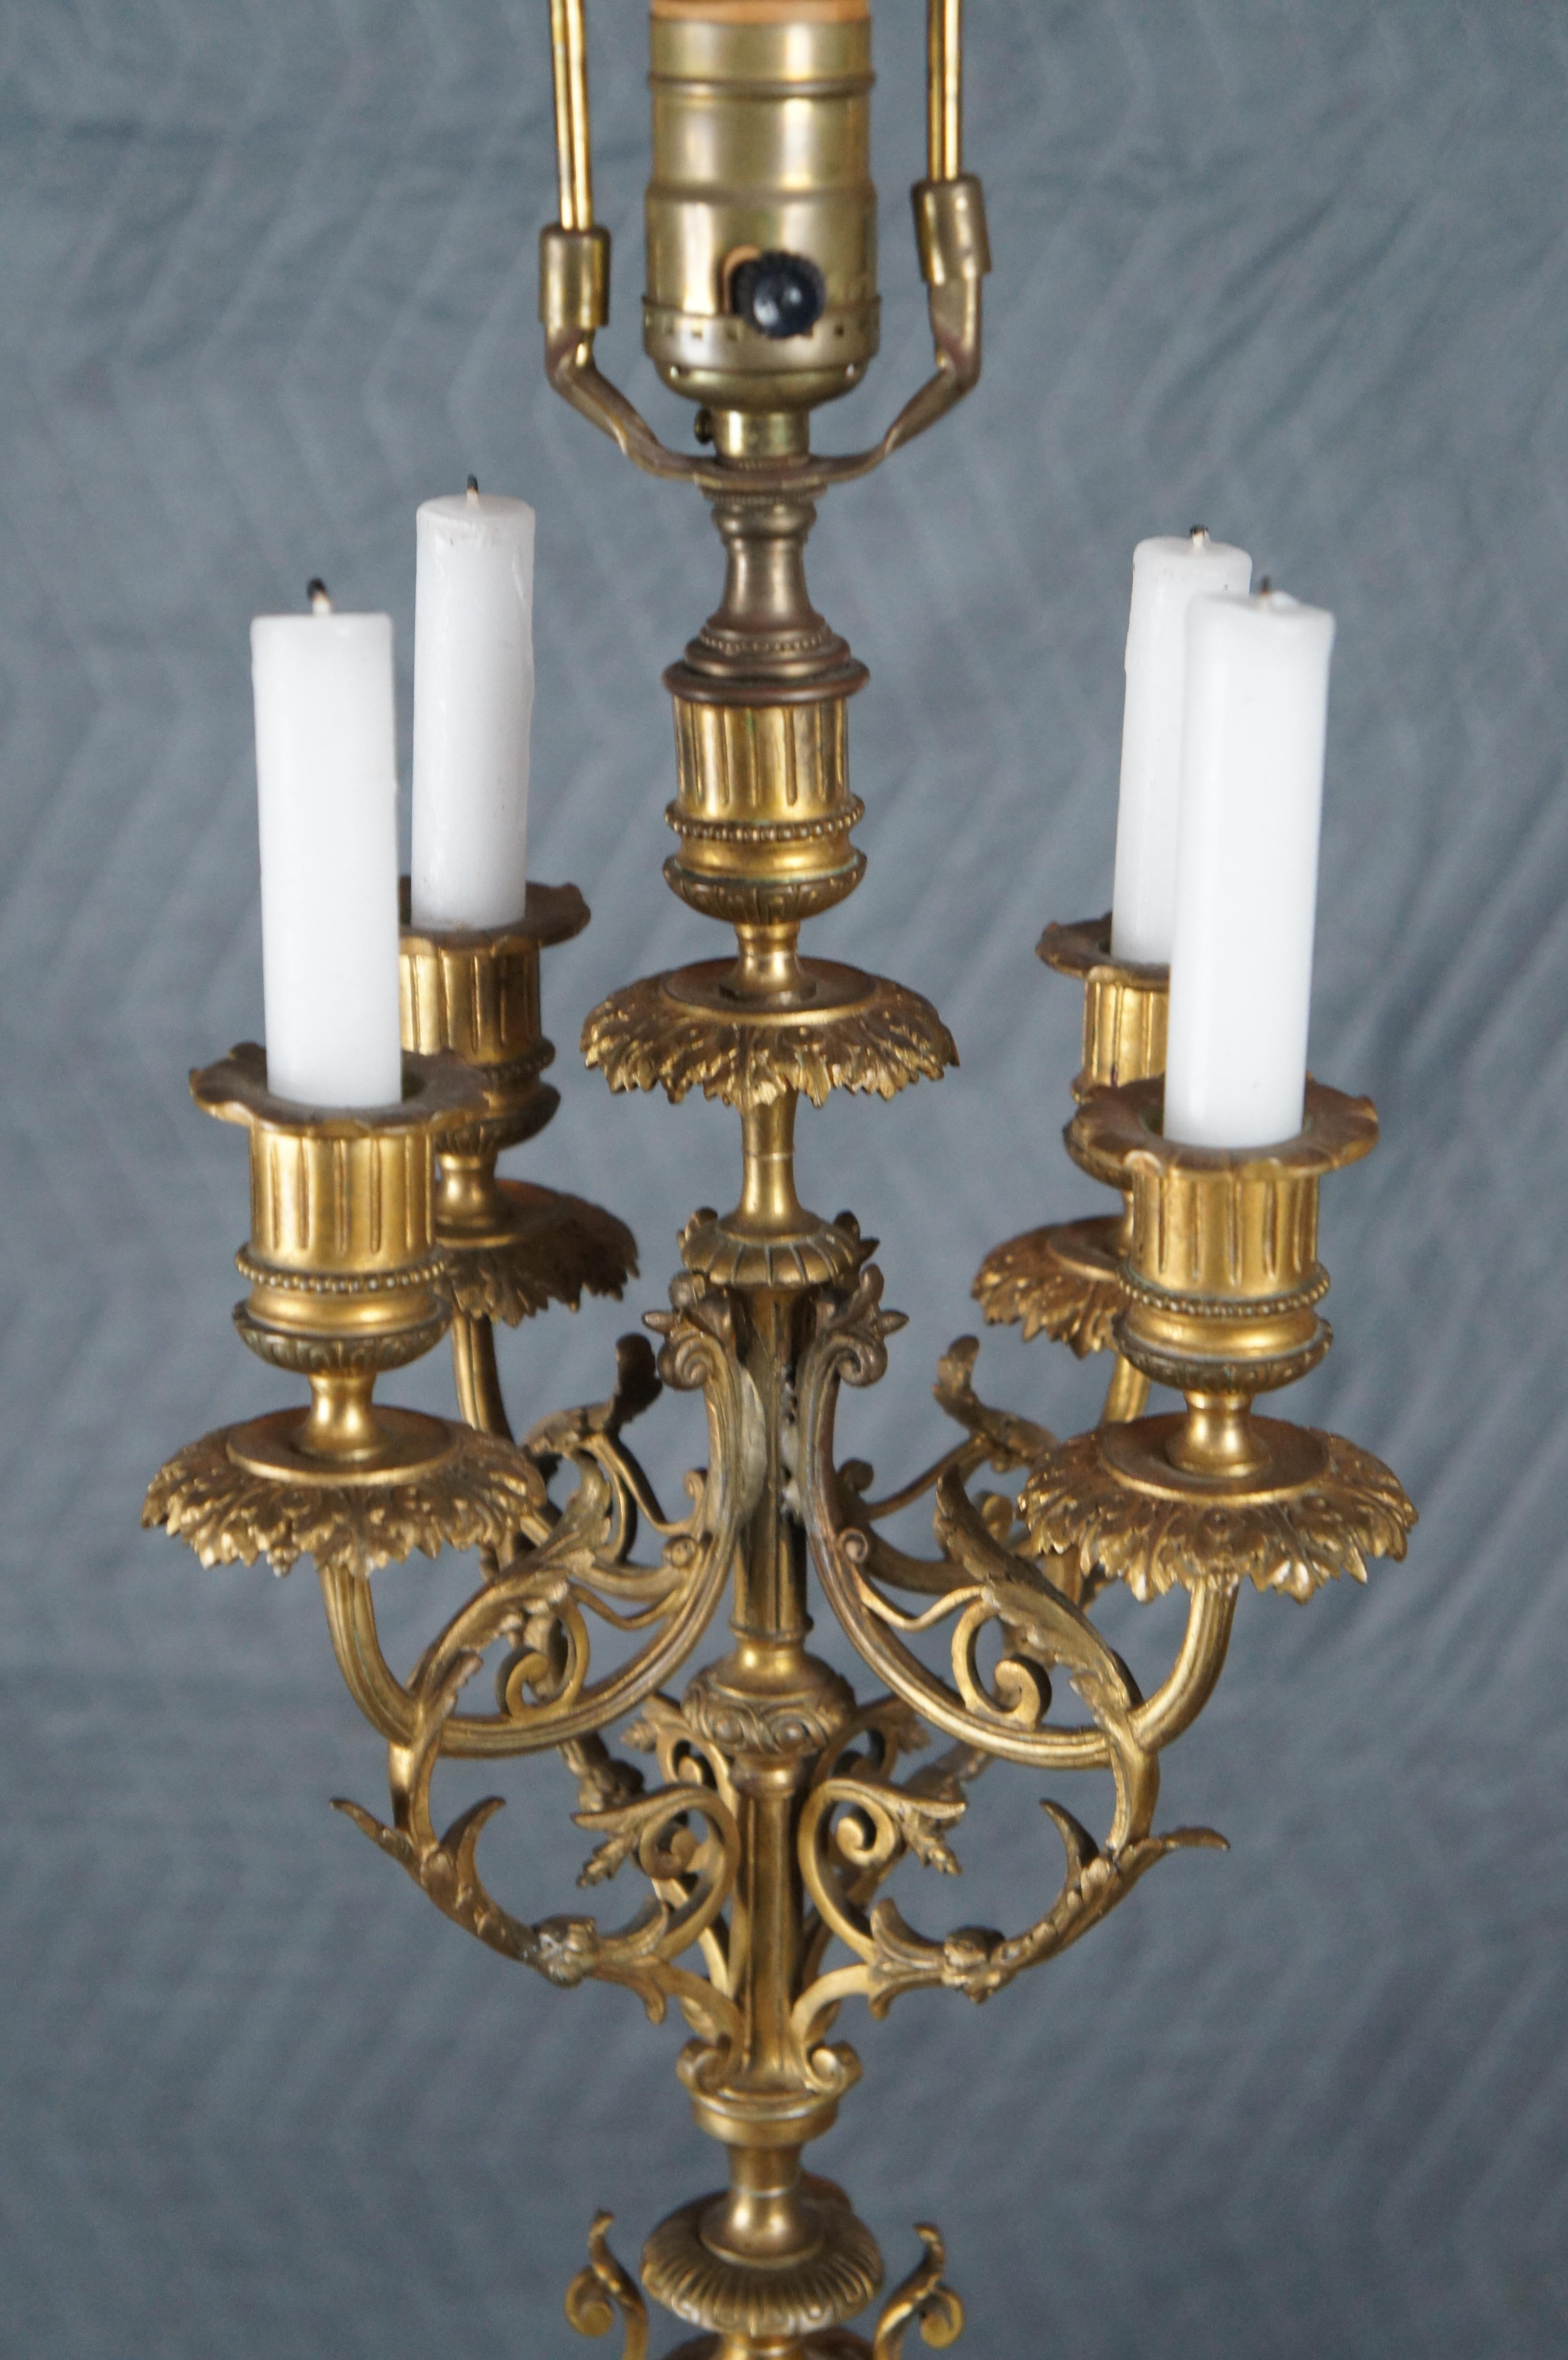 20th Century Antique French Louis XVI Gilt Brass Converted 4 Arm Candelabra Table Lamp Light For Sale